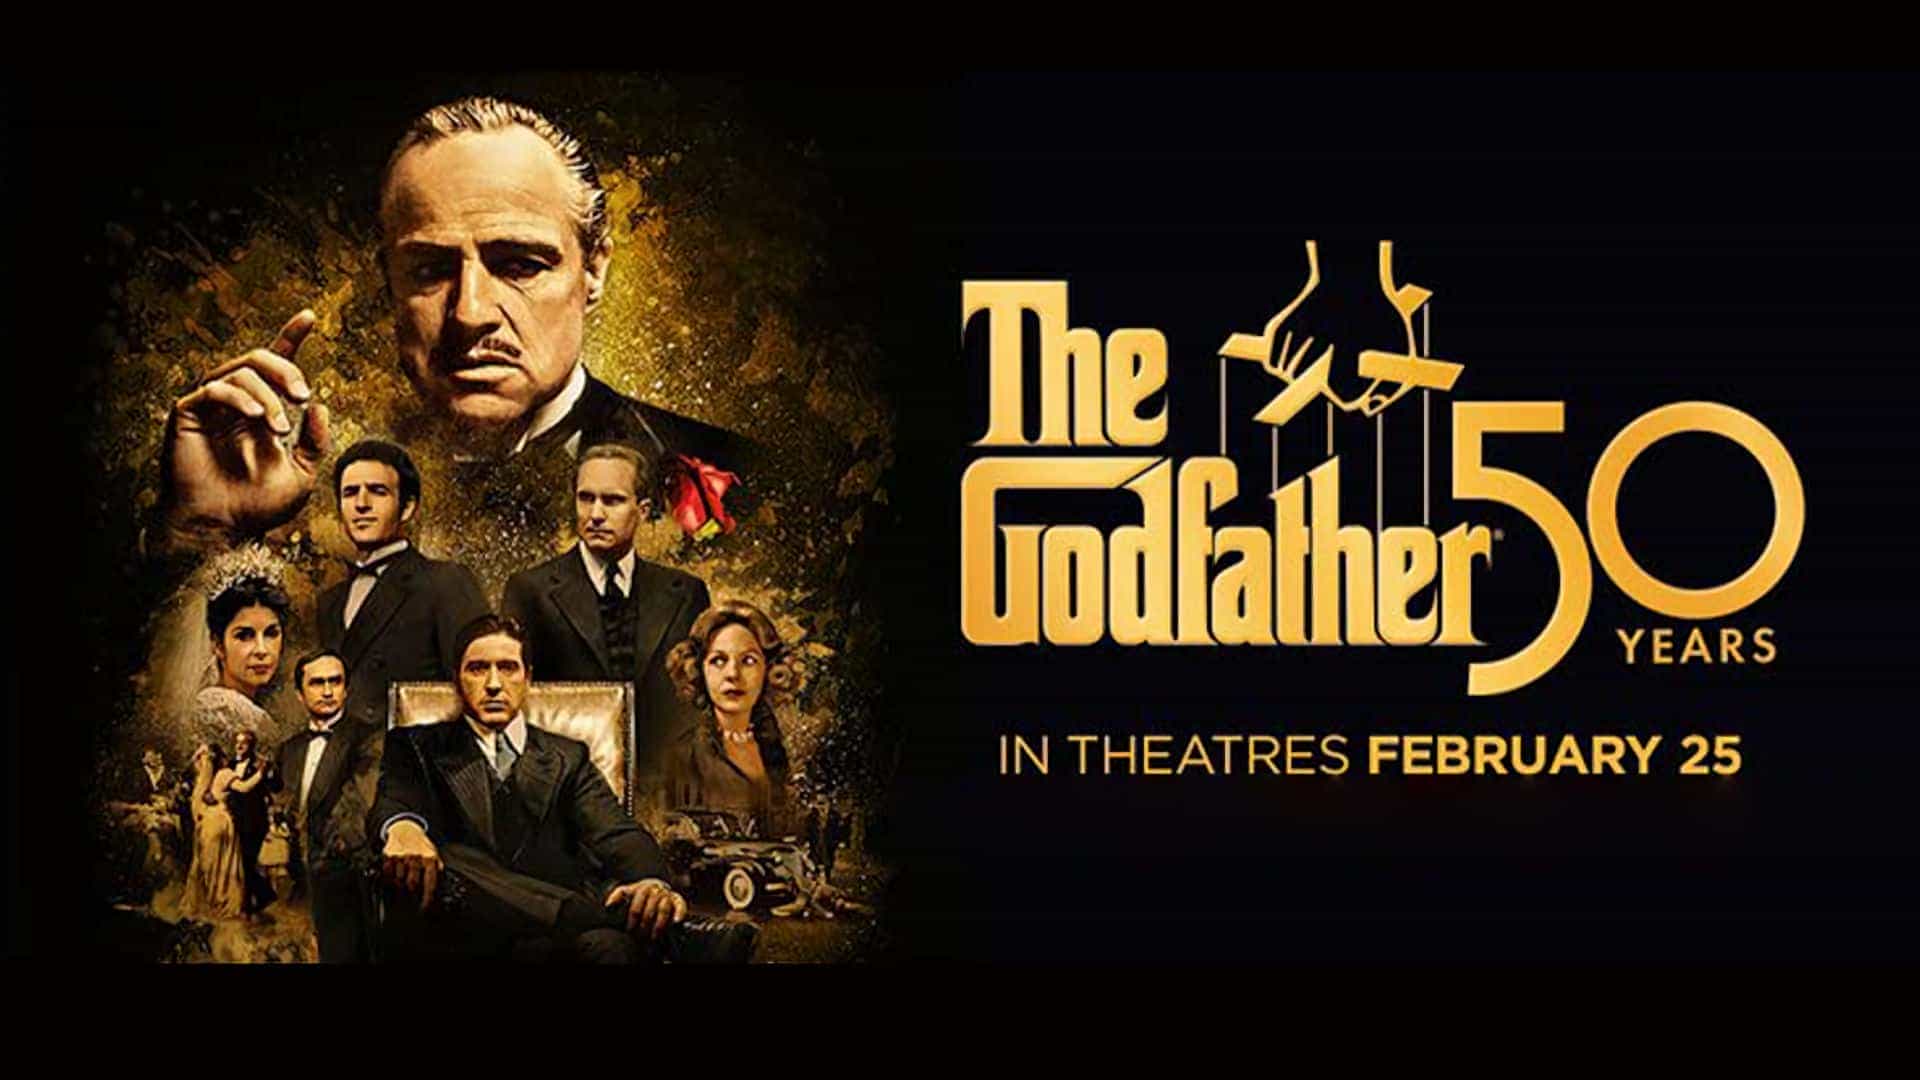 The Godfather (15)